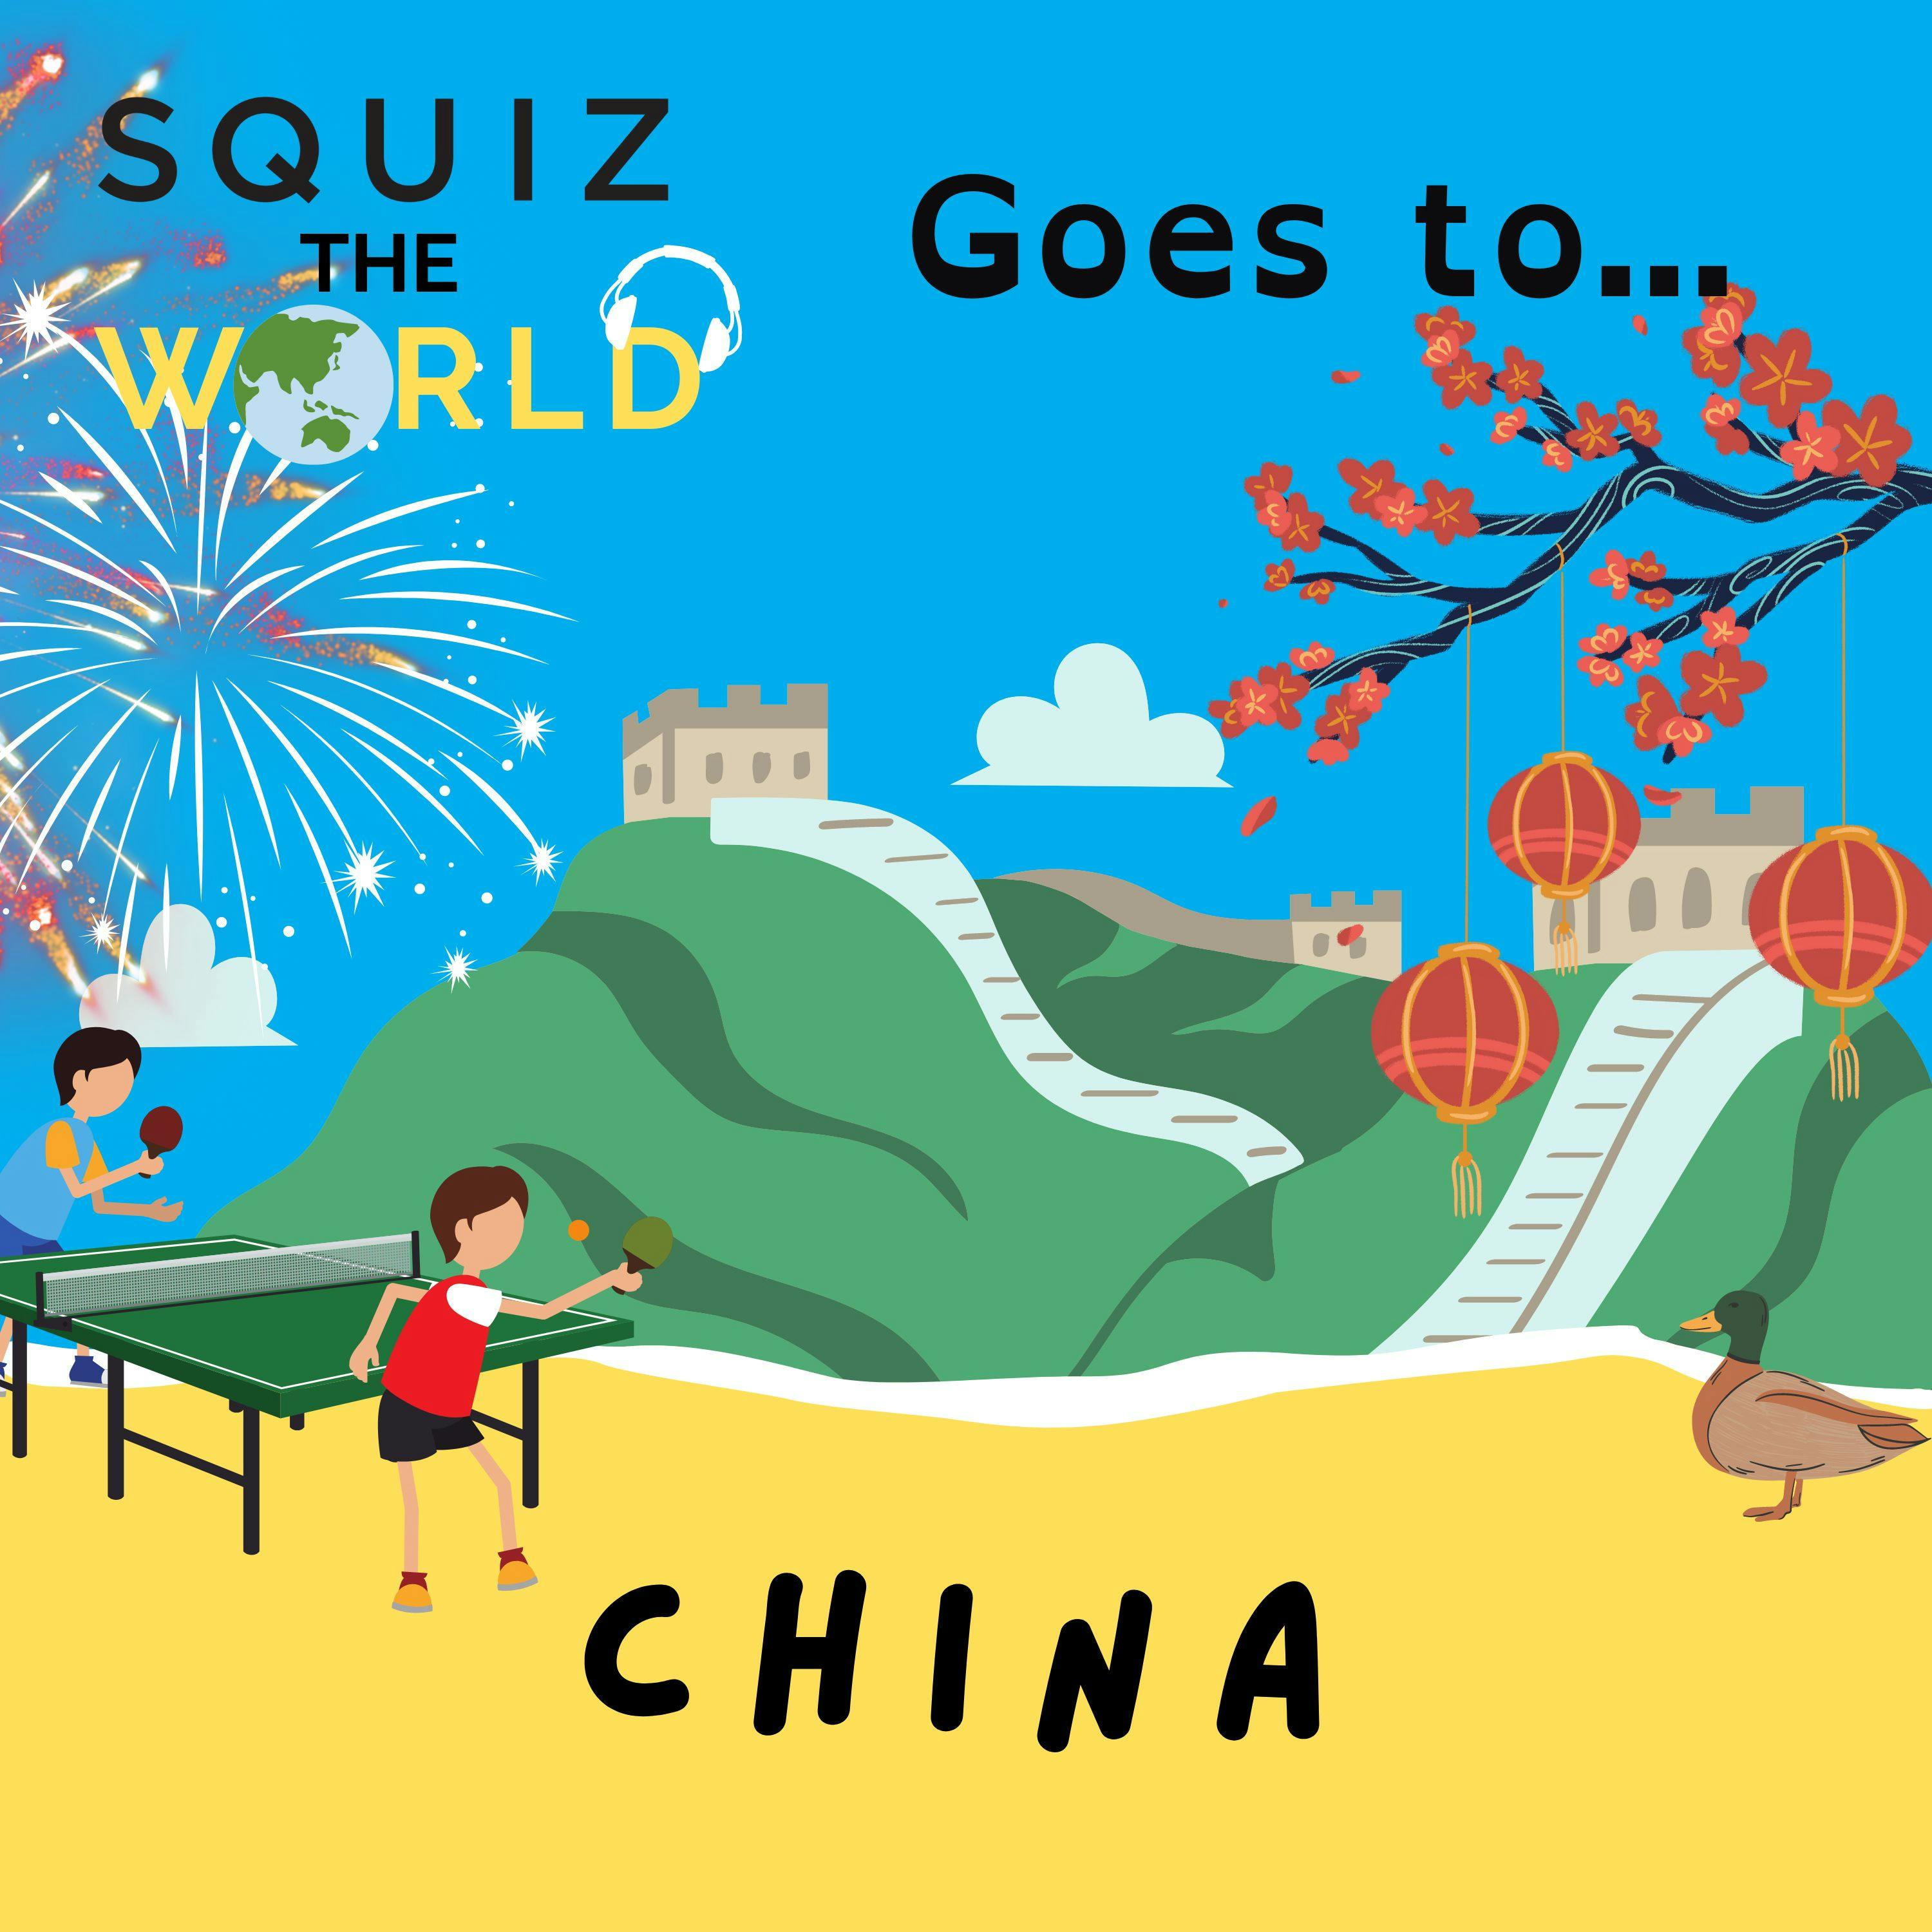 Squiz The World goes to... China